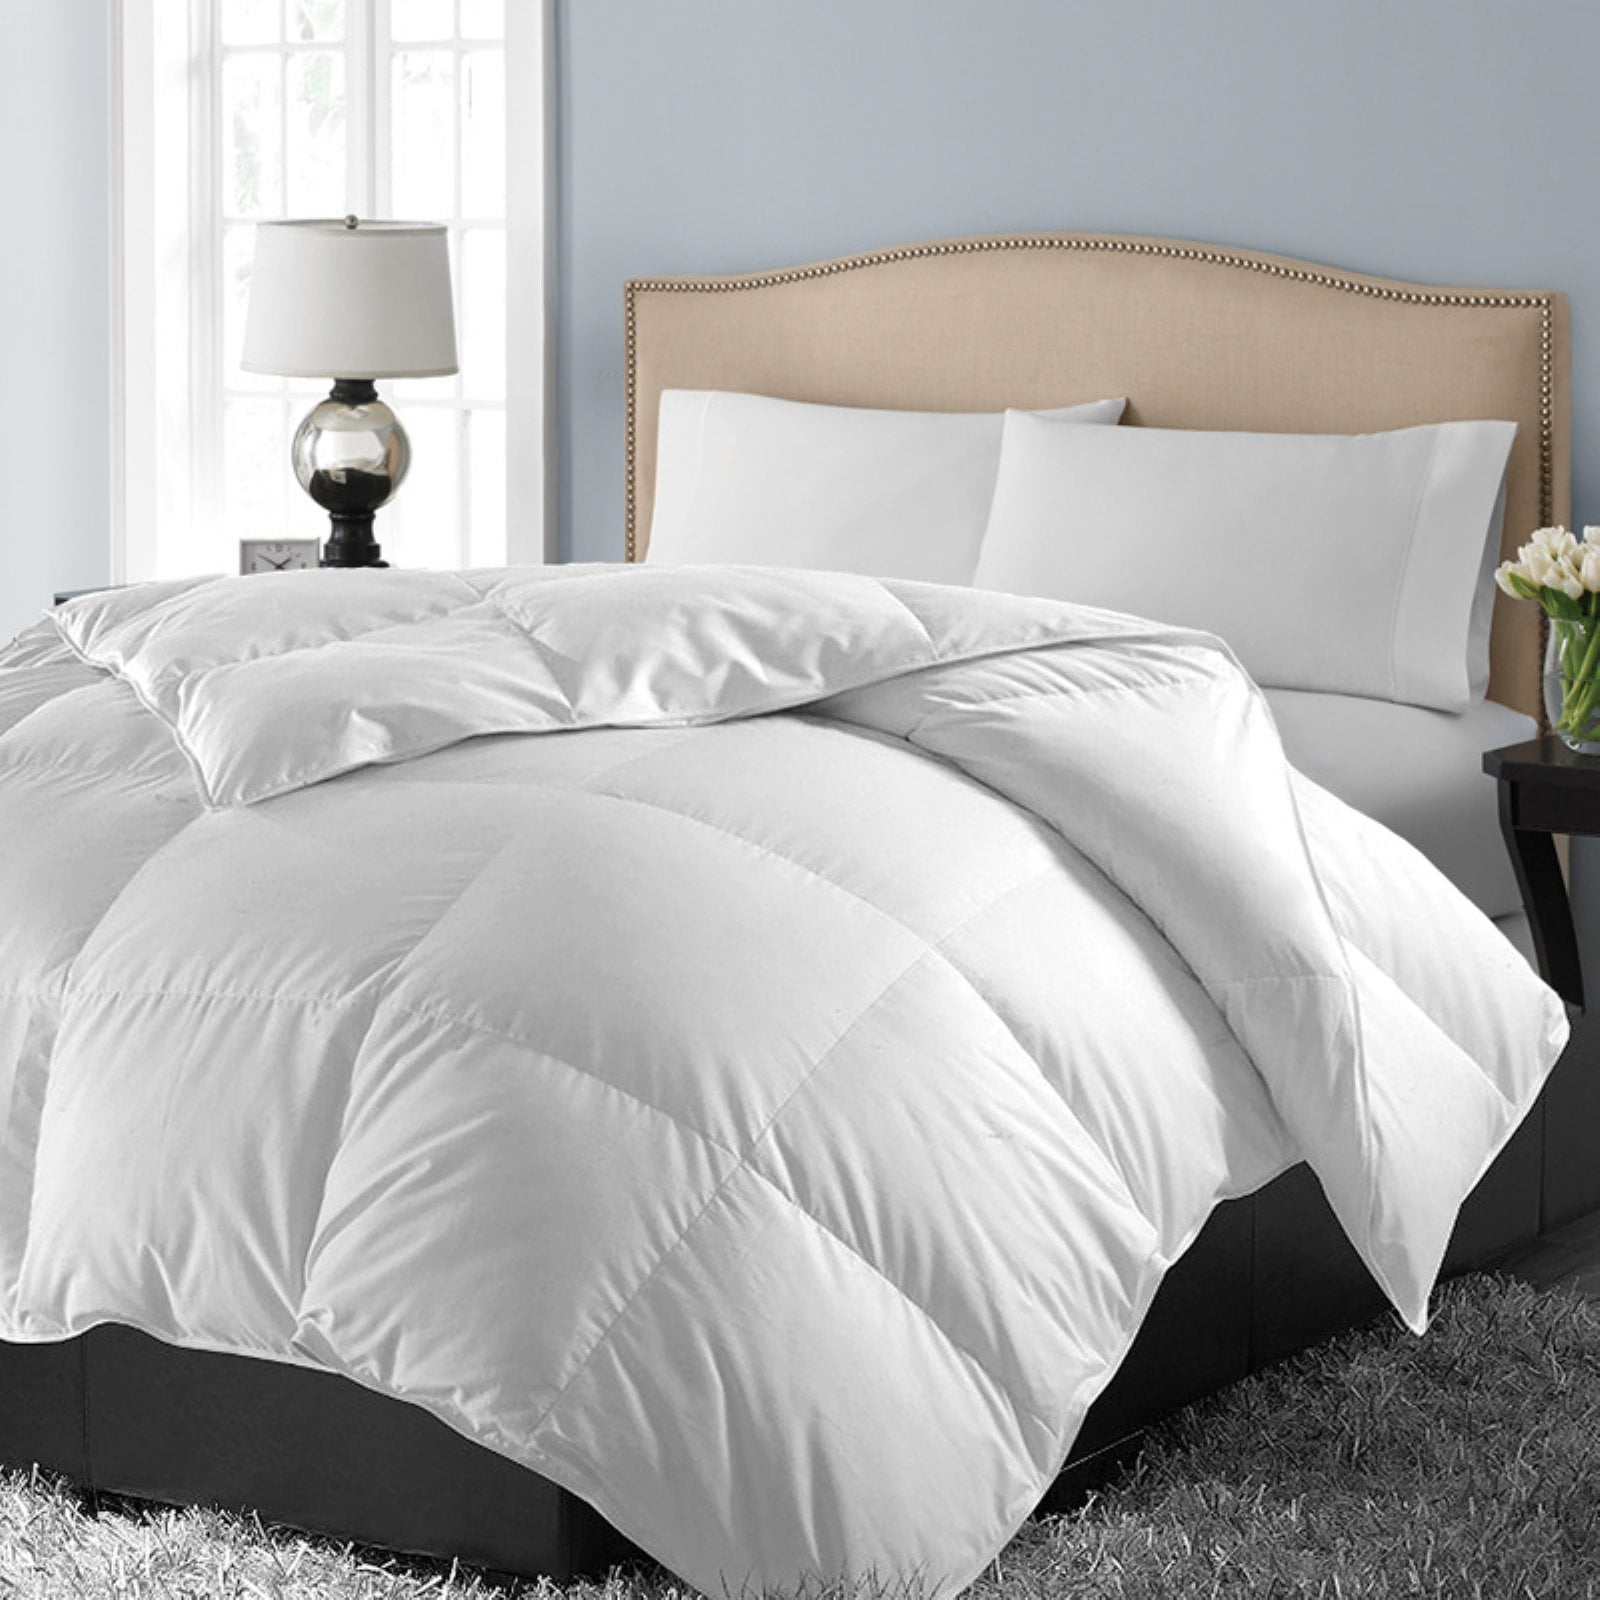 Details about   The Ultimate All Season Comforter Deal Hotel Luxury Down Alternative Comforter D 